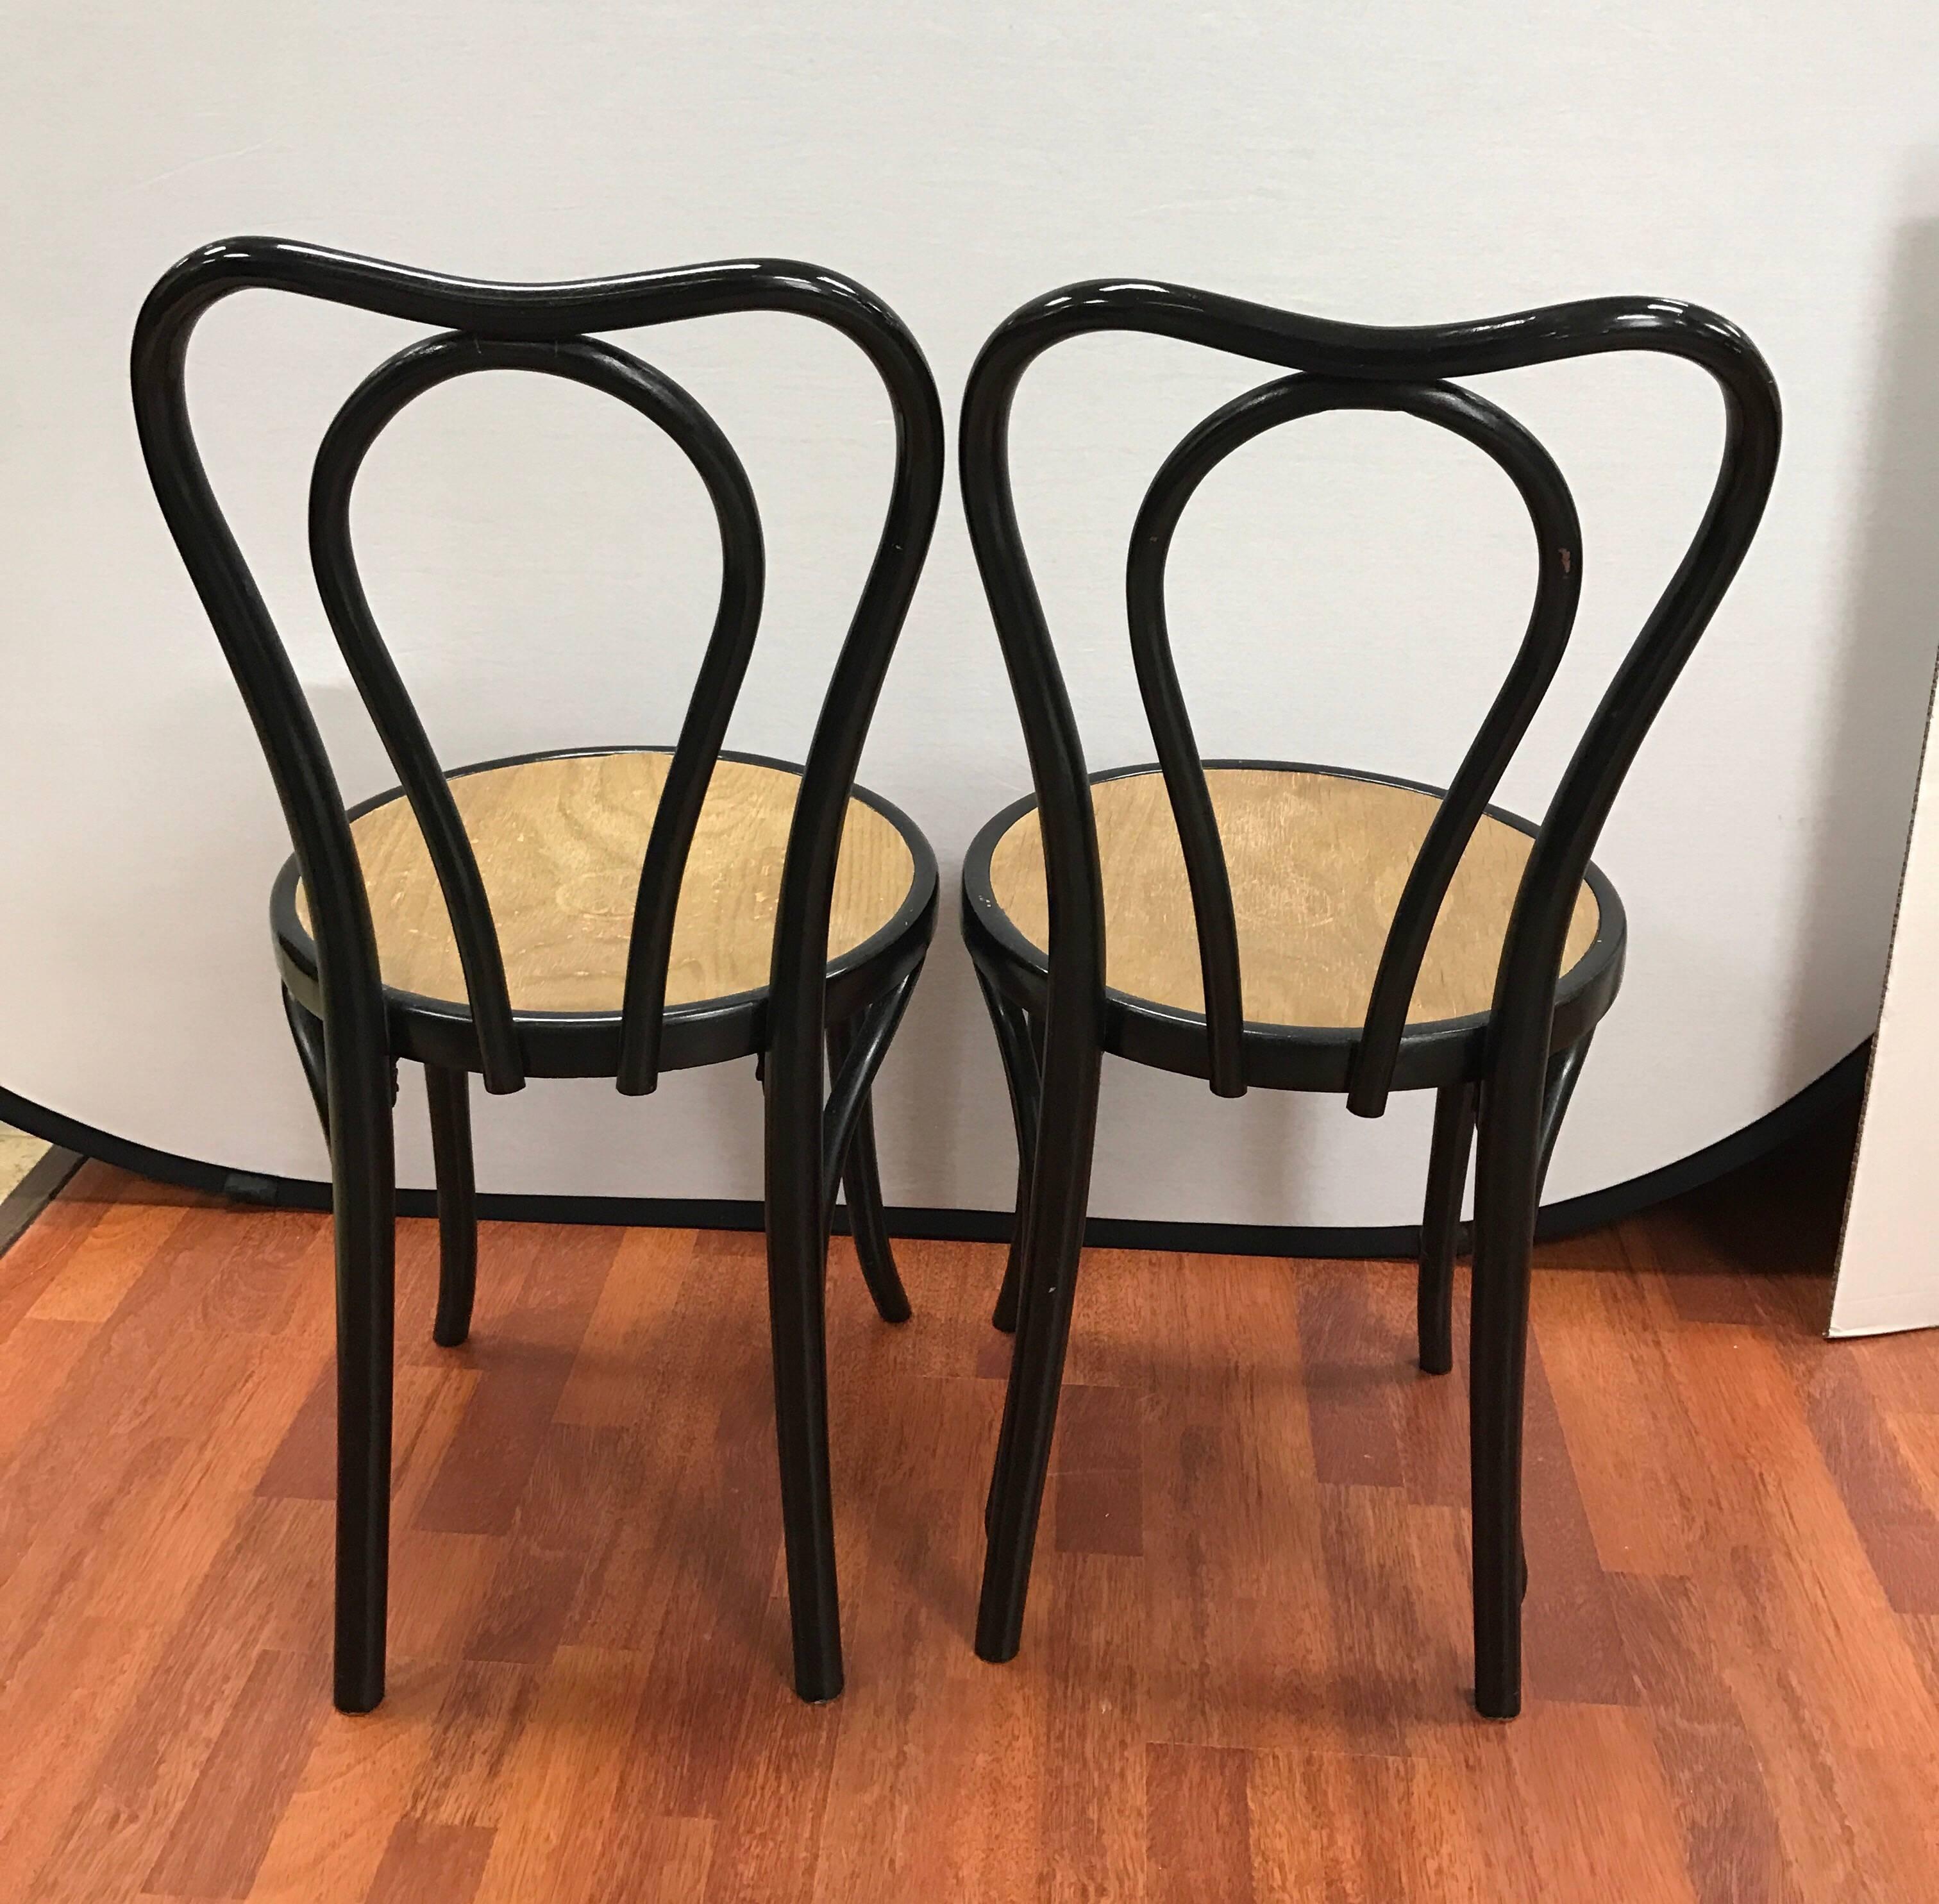 Pair of black Thonet style bentwood chairs with pressed seat.